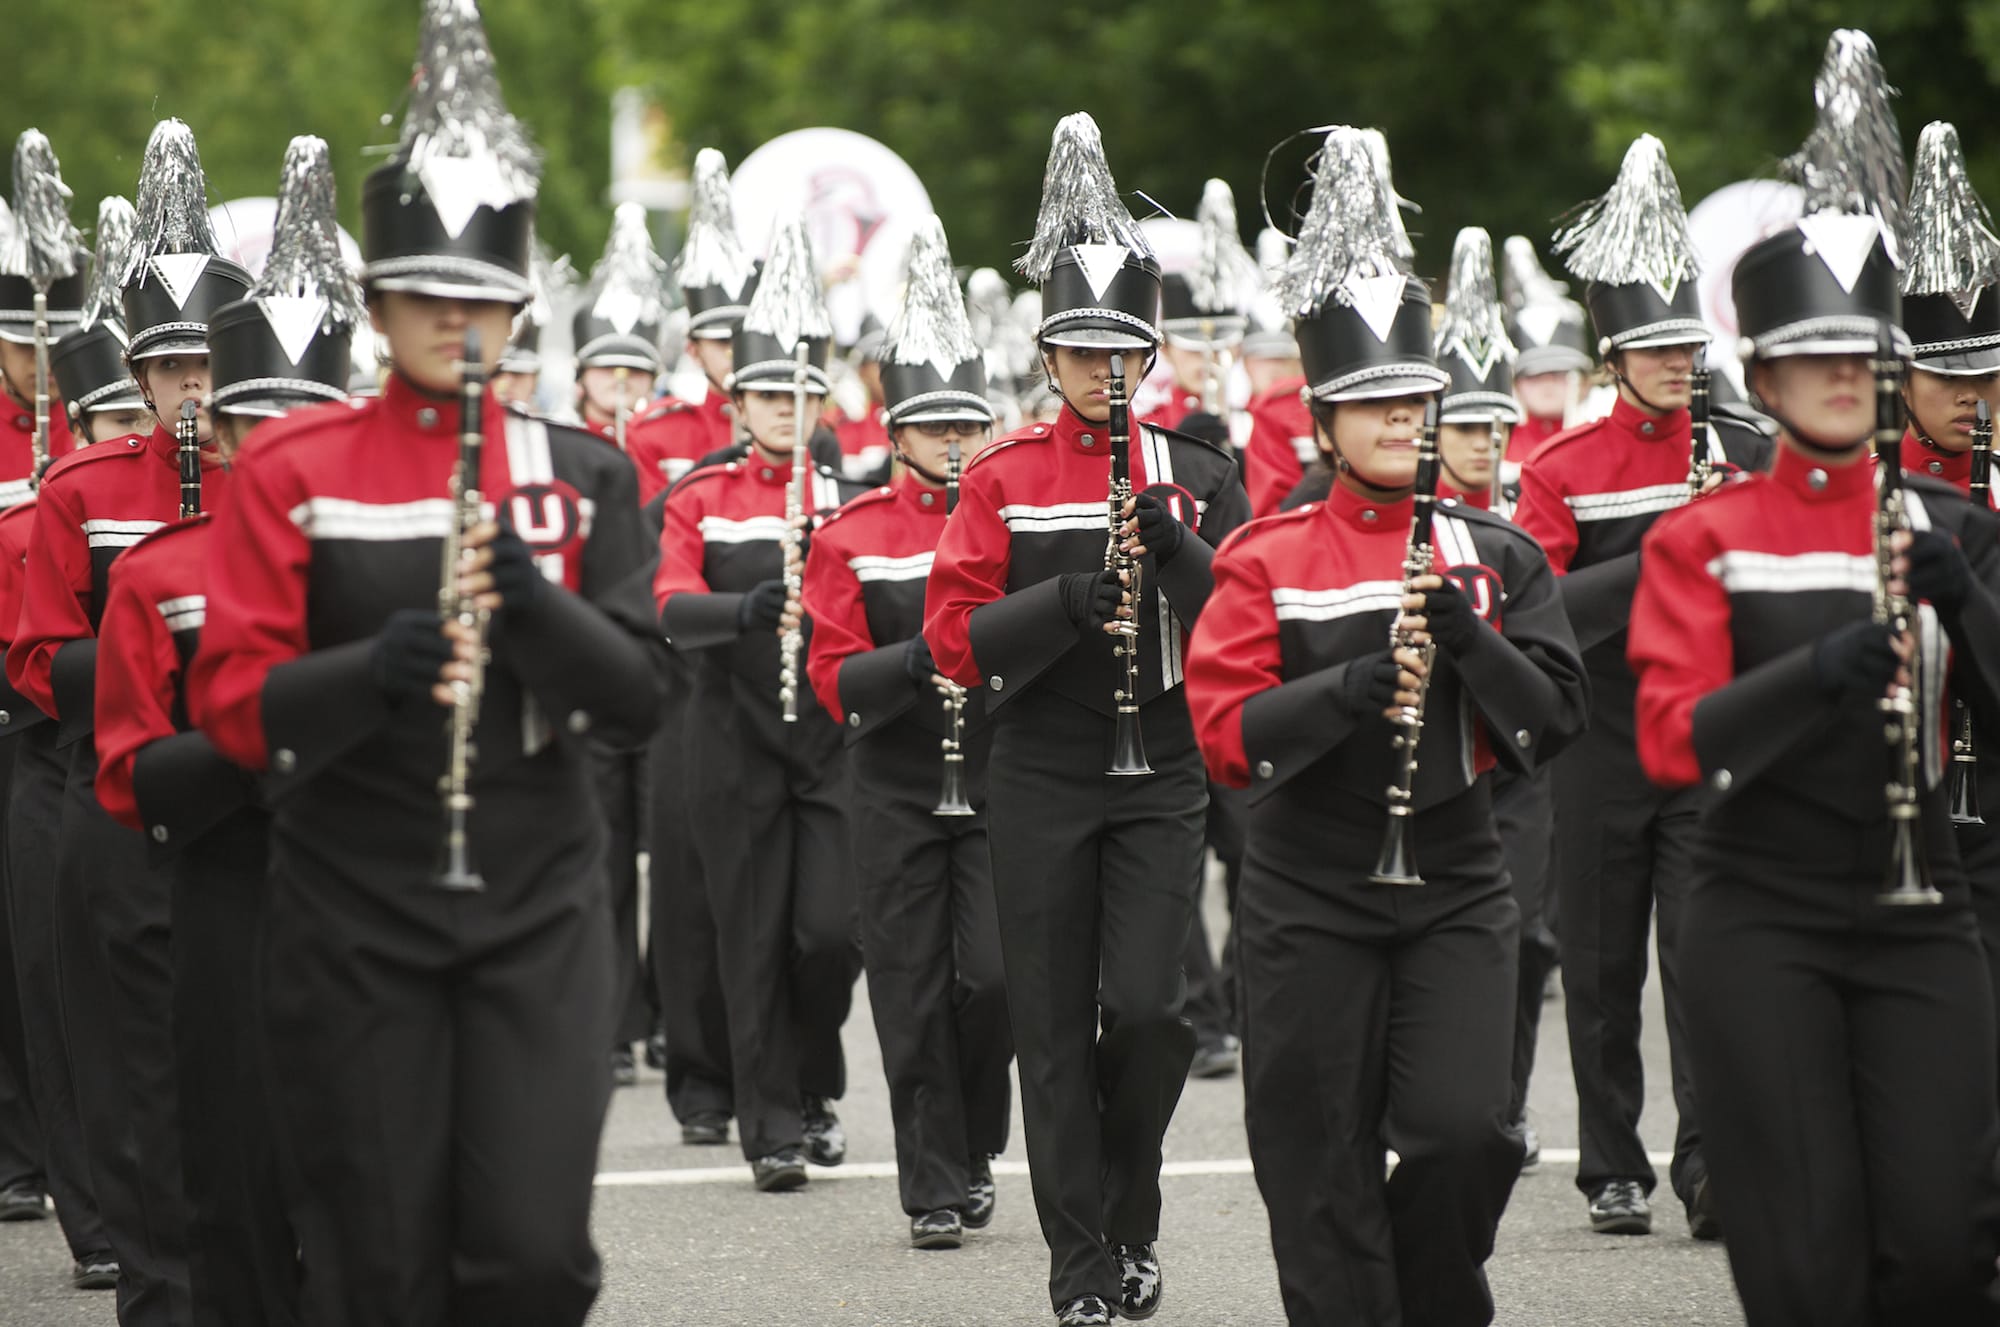 The Union High School marching band won top honors Saturday at the Rose Festival Grand Floral Parade in Portland.